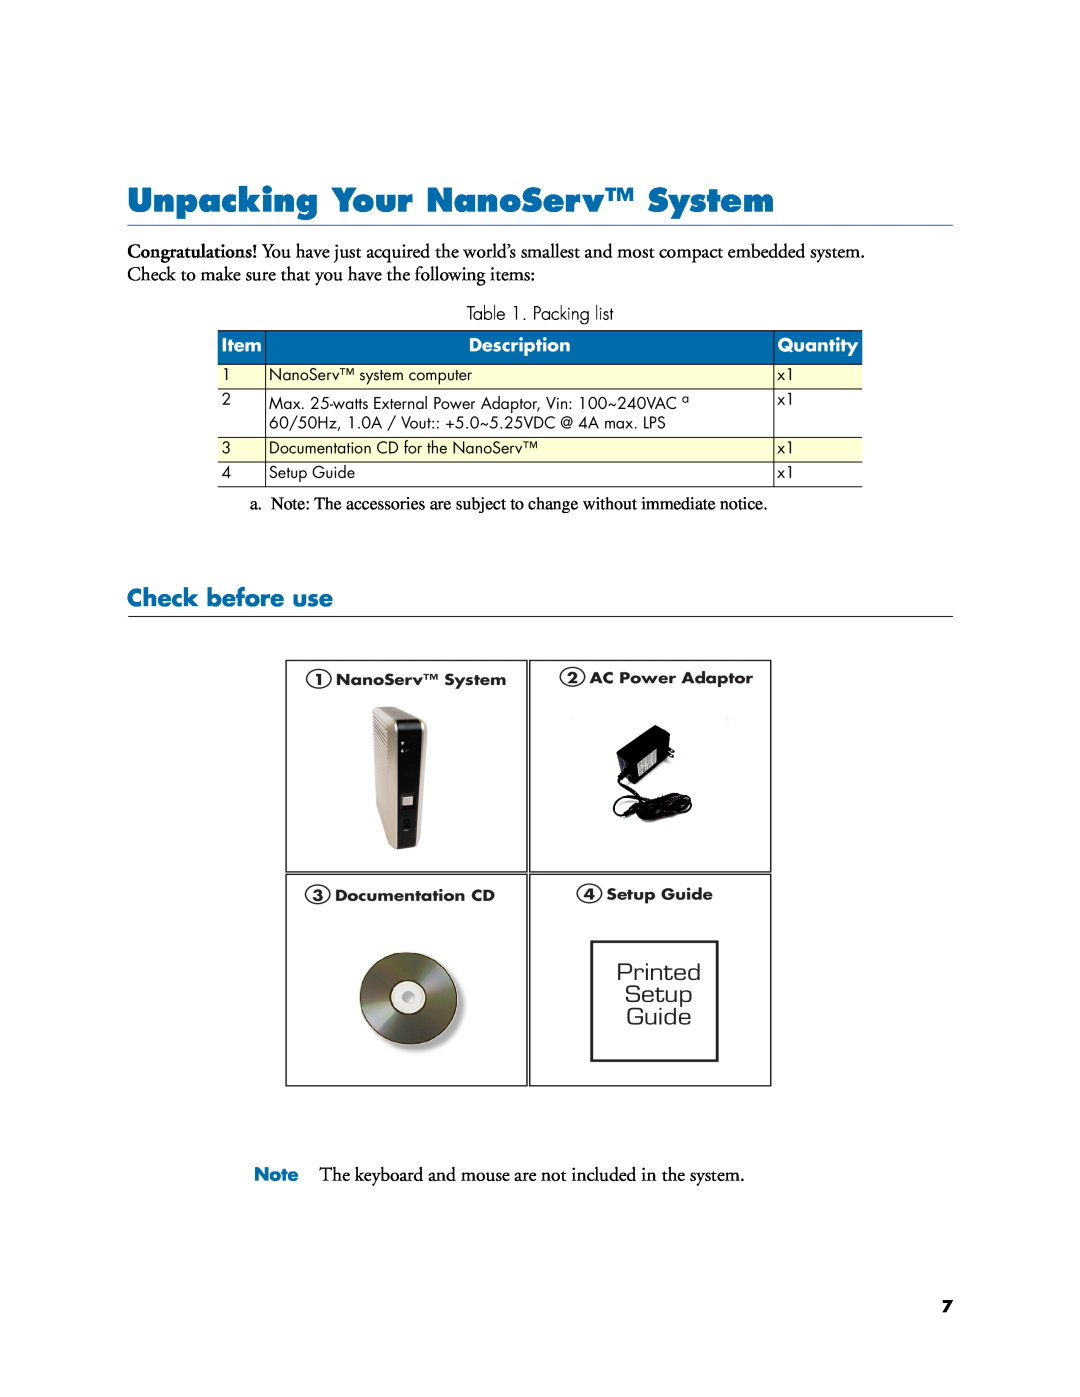 Patton electronic 07M6070-UM user manual Unpacking Your NanoServ System, Check before use, Printed Setup Guide 